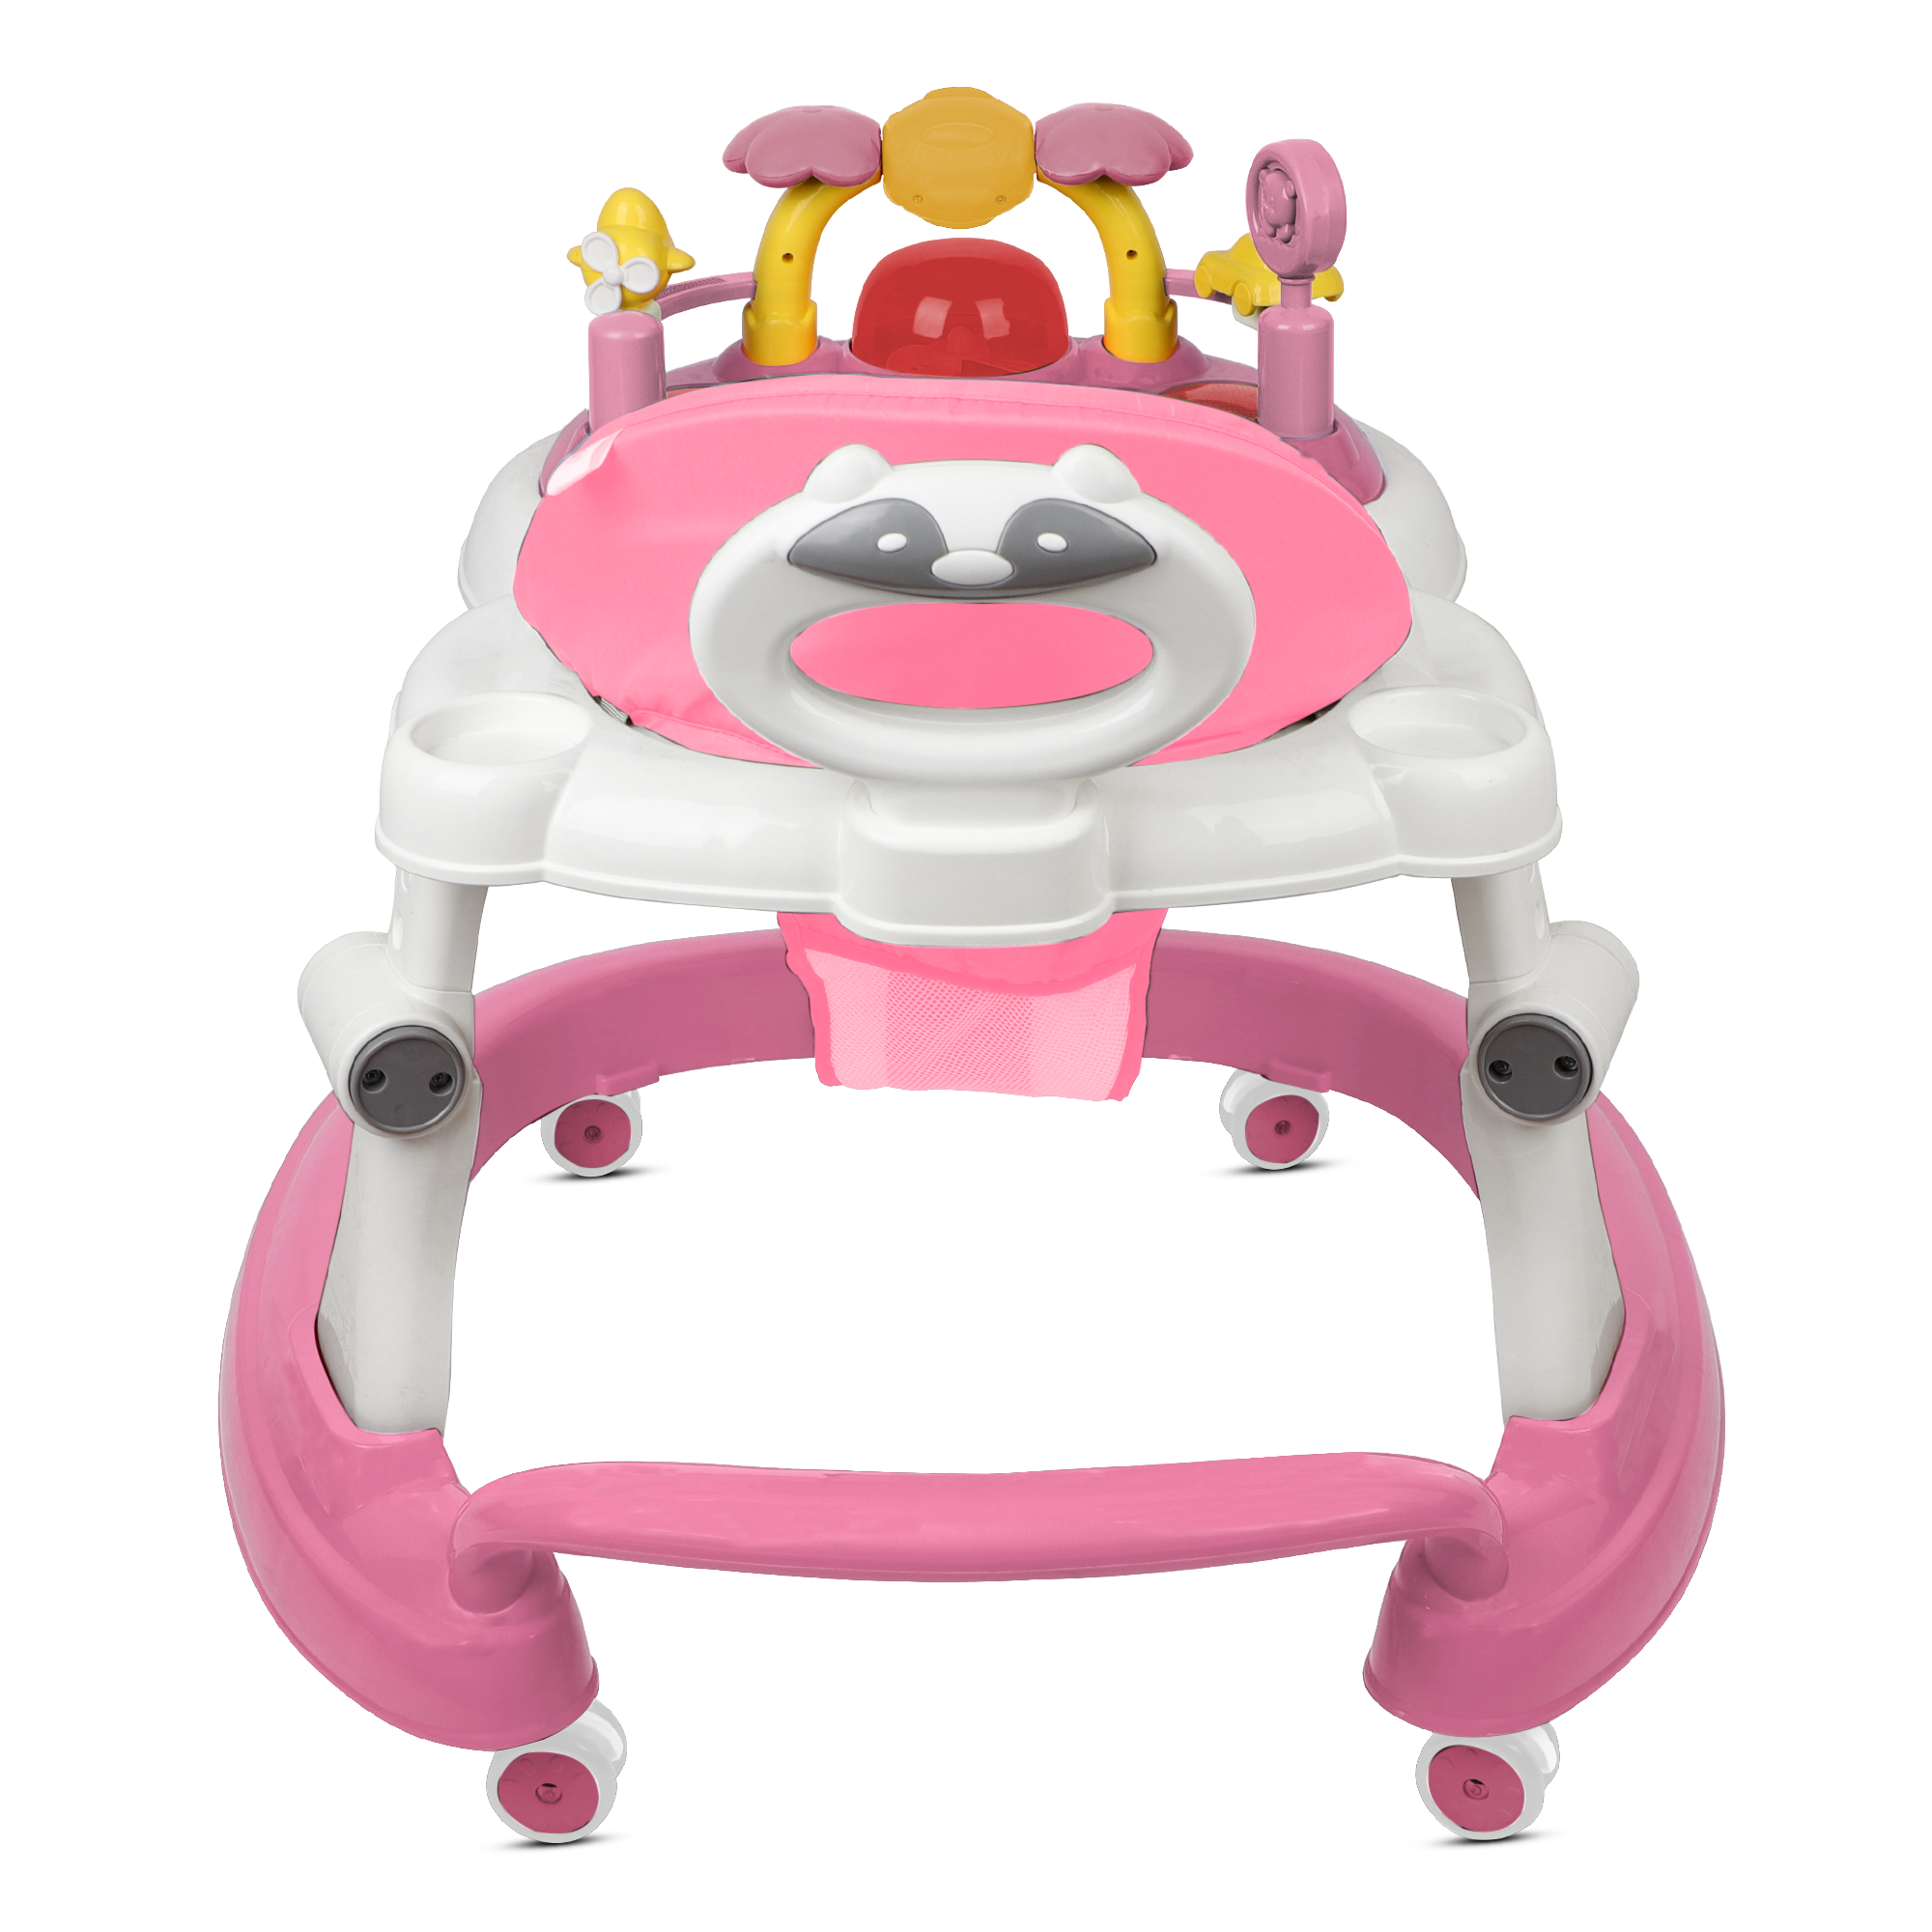 PINK BABY WALKER WITH PUSH HANDLE